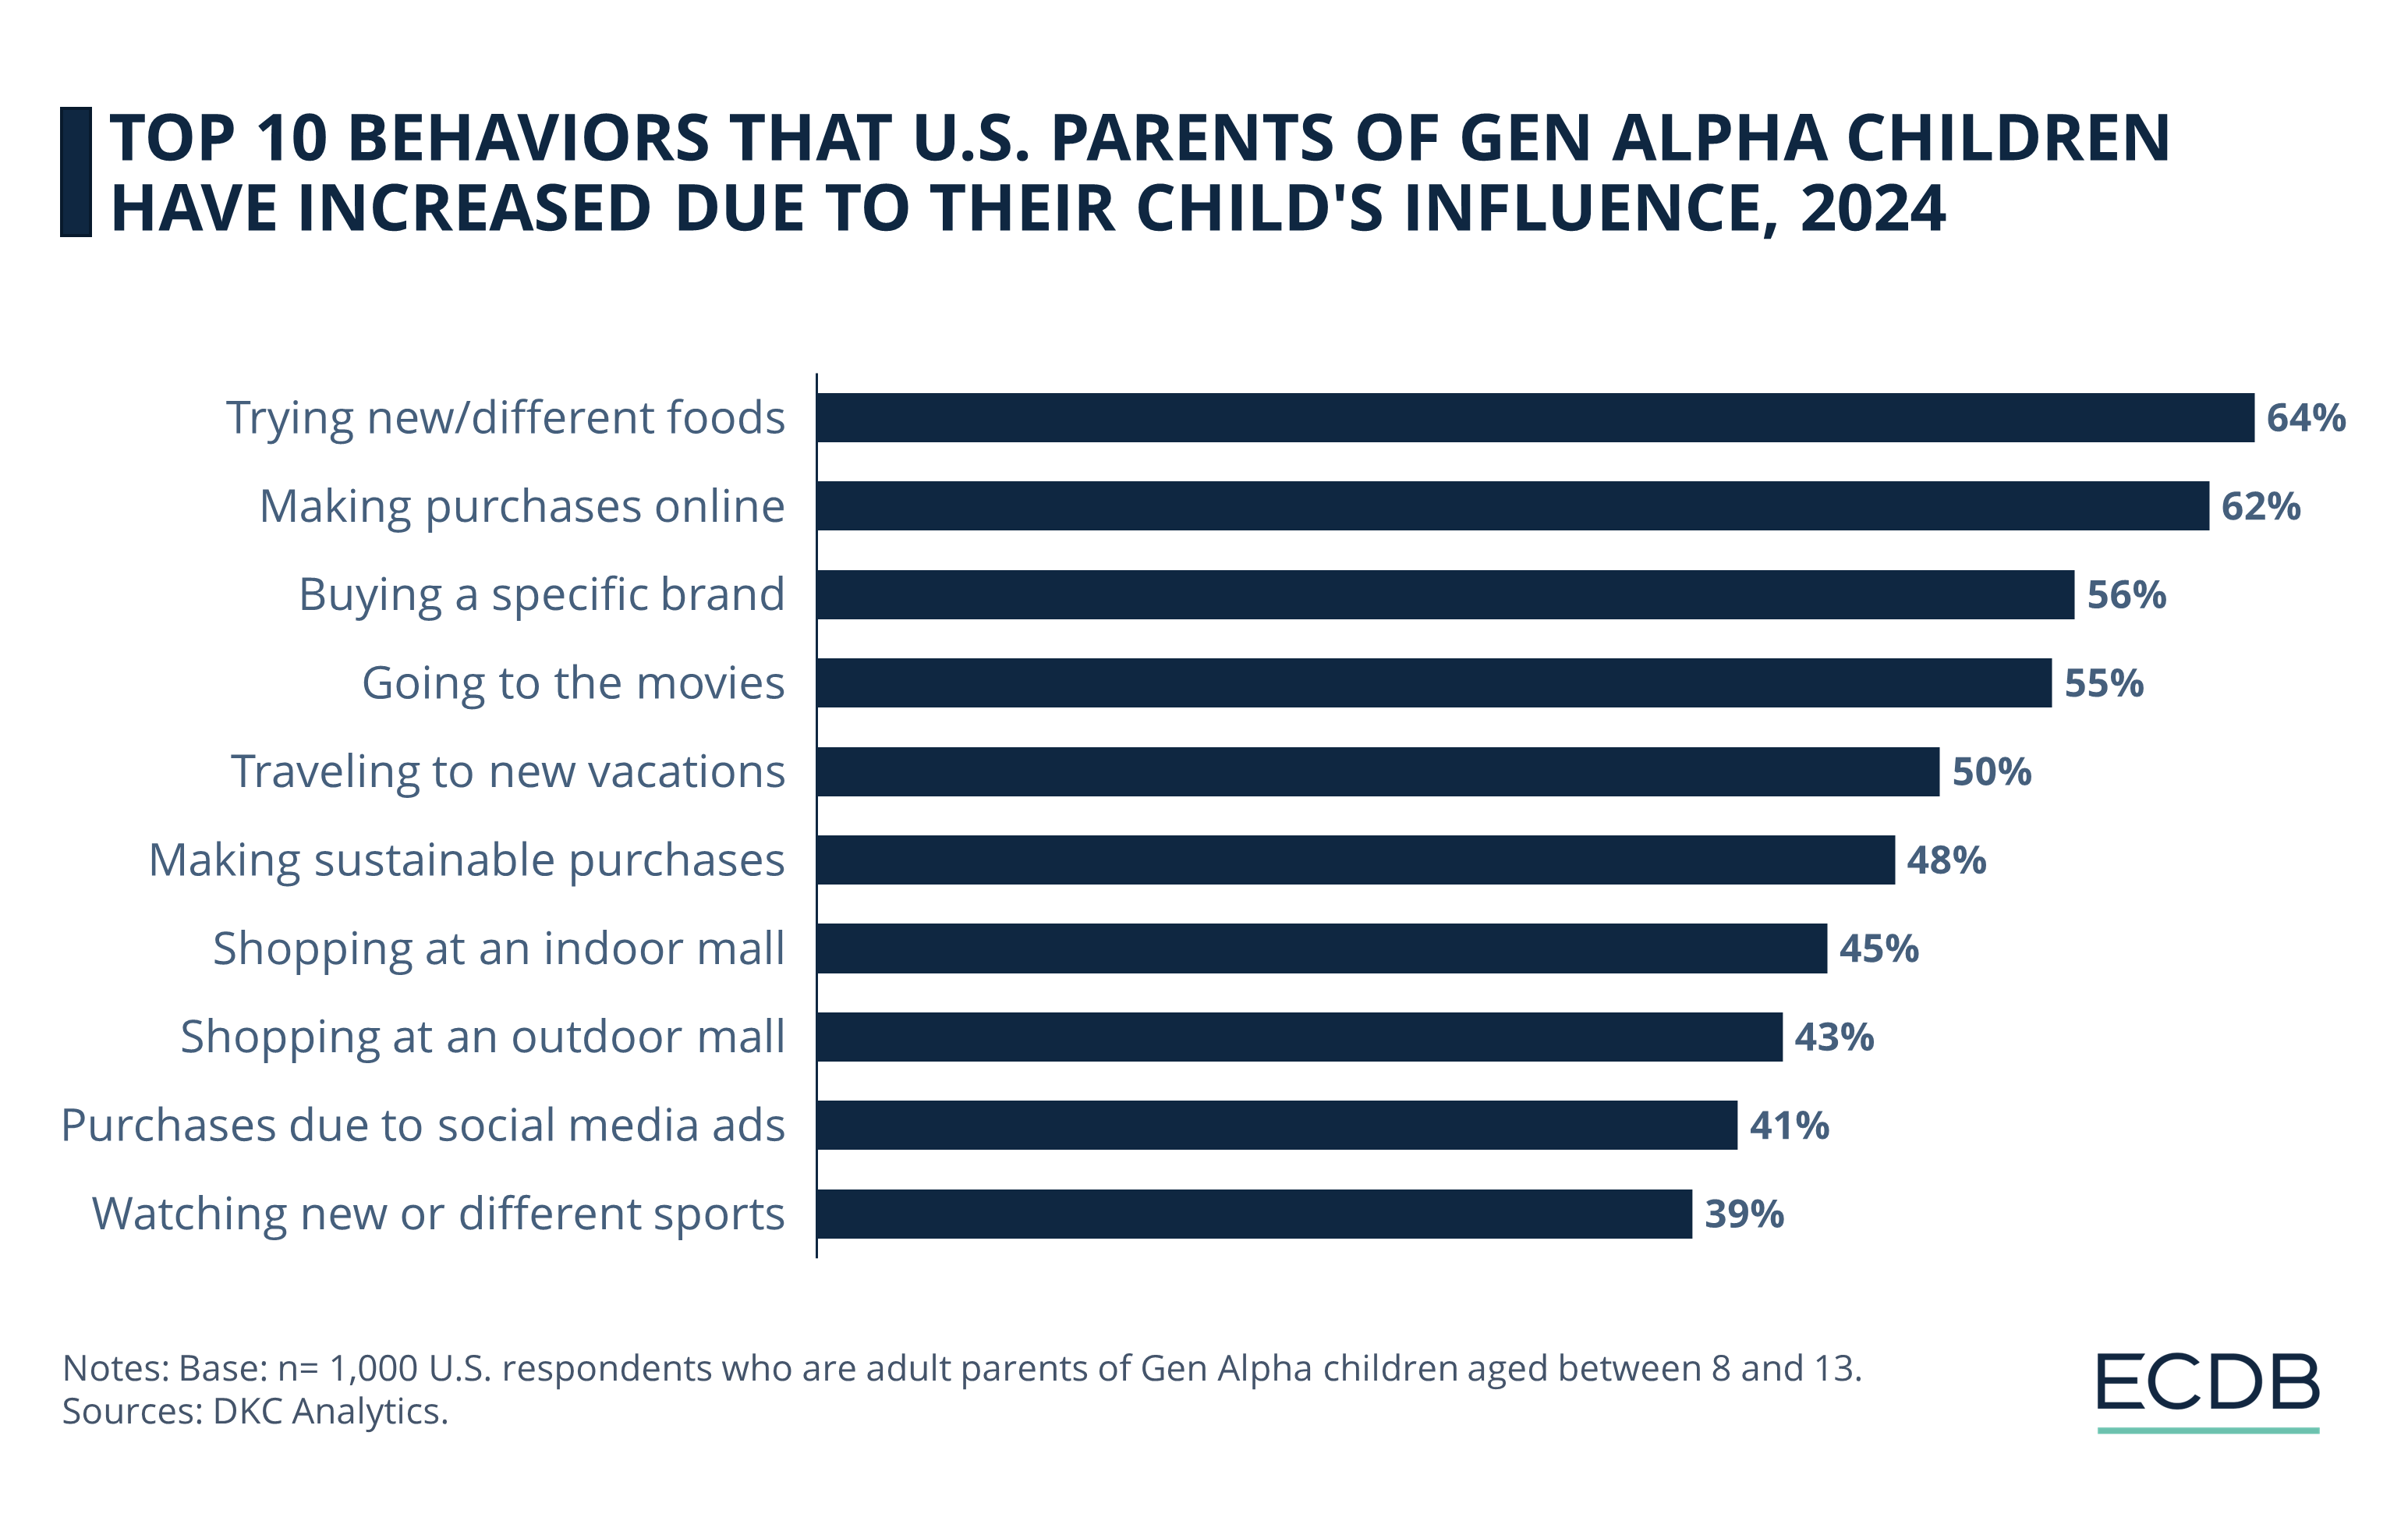 Top 10 Behaviors That U.S. Parents of Gen Alpha Children Have Increased Due to Their Child's Influence, 2024